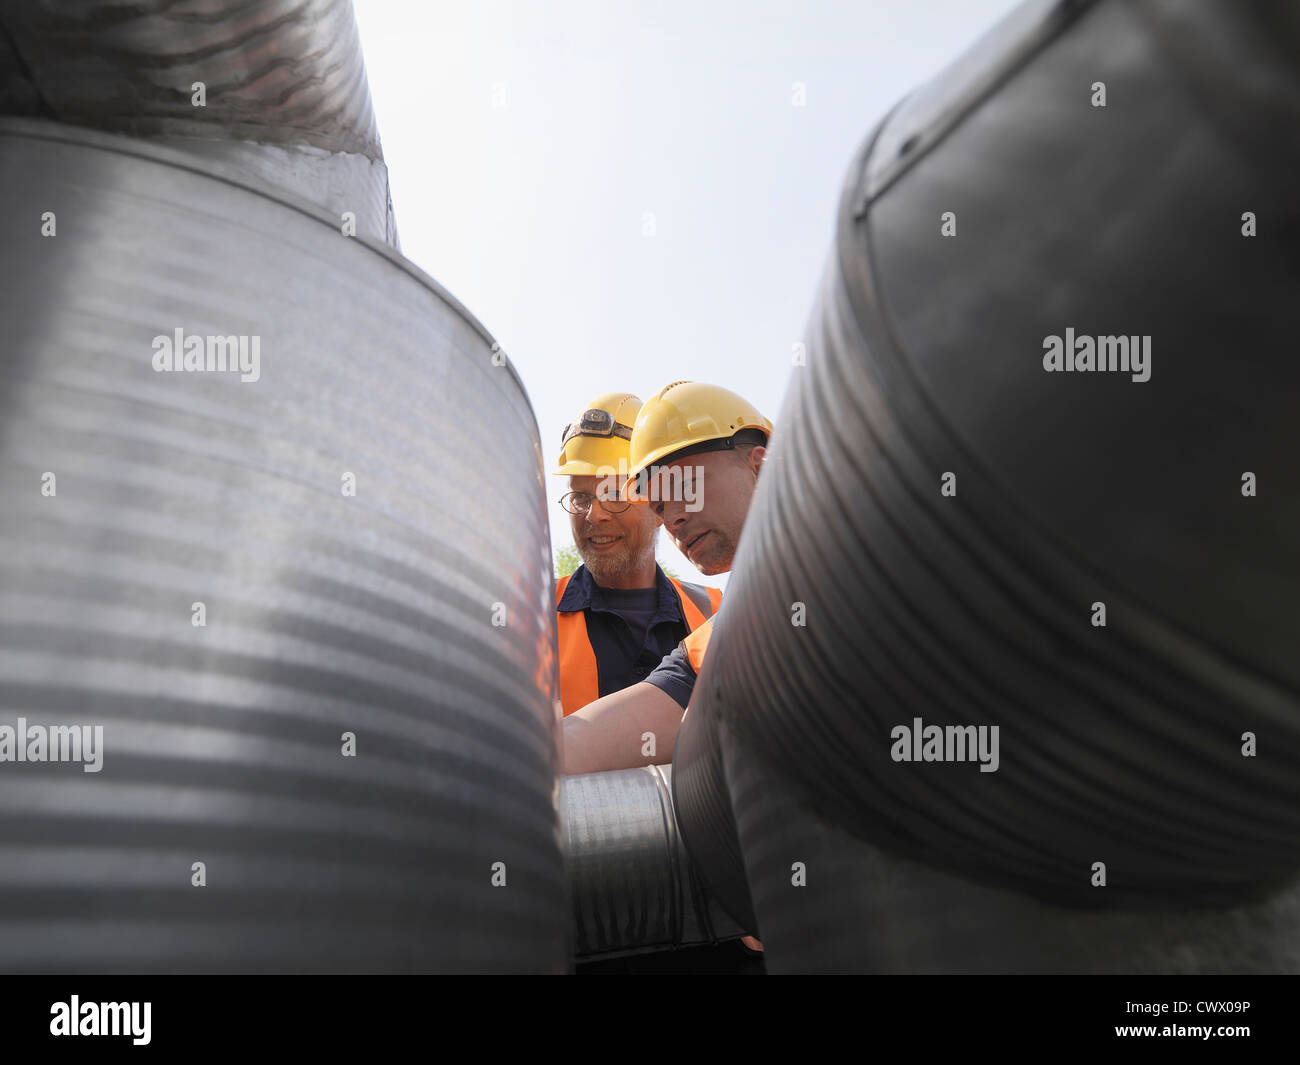 Workers examining machinery on site Stock Photo